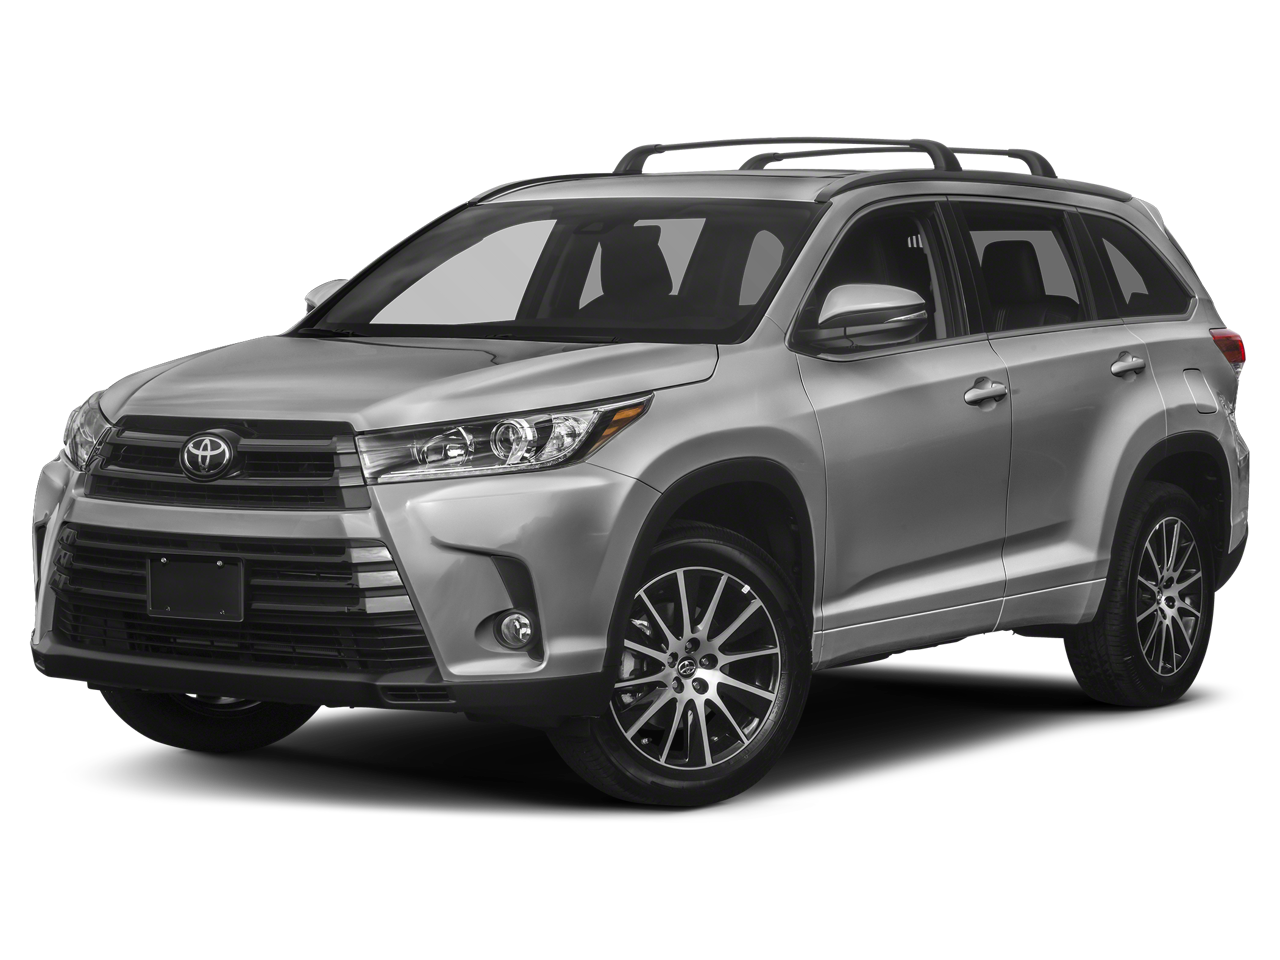 2019 Toyota Highlander SE in Waukegan, IL - Classic Cares